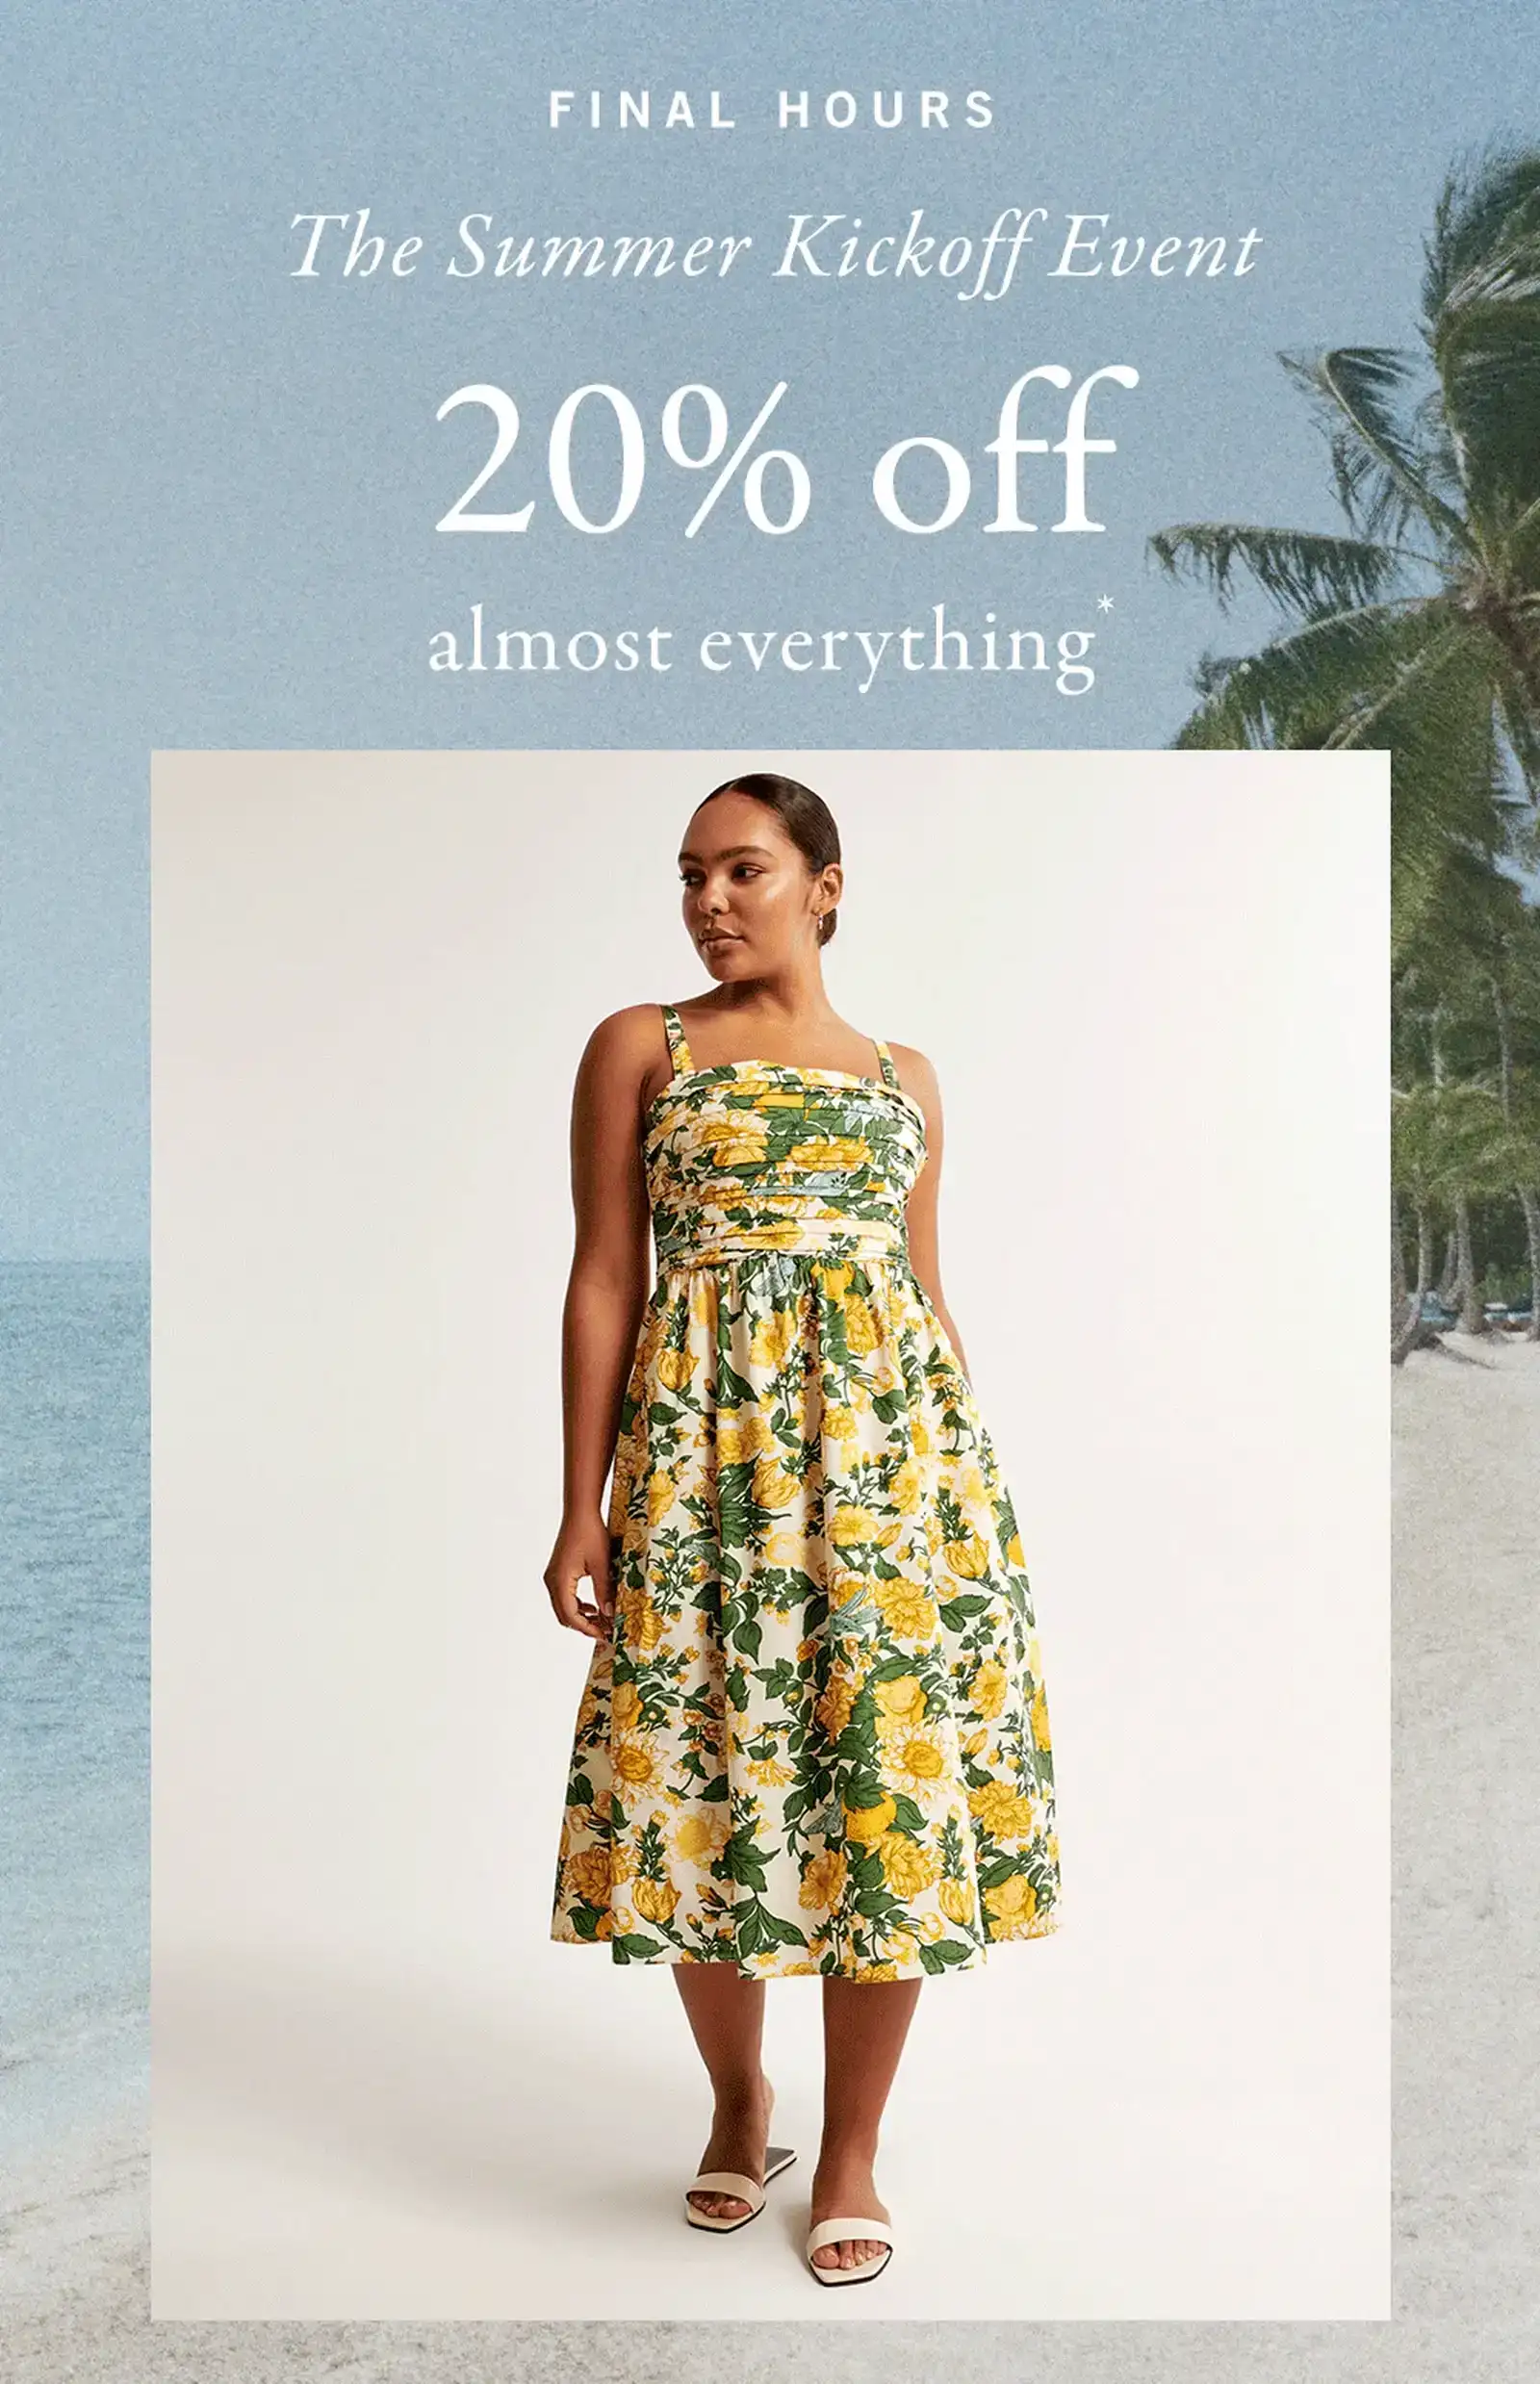 FINAL HOURS The Summer Kickoff Event 20% off almost everything*